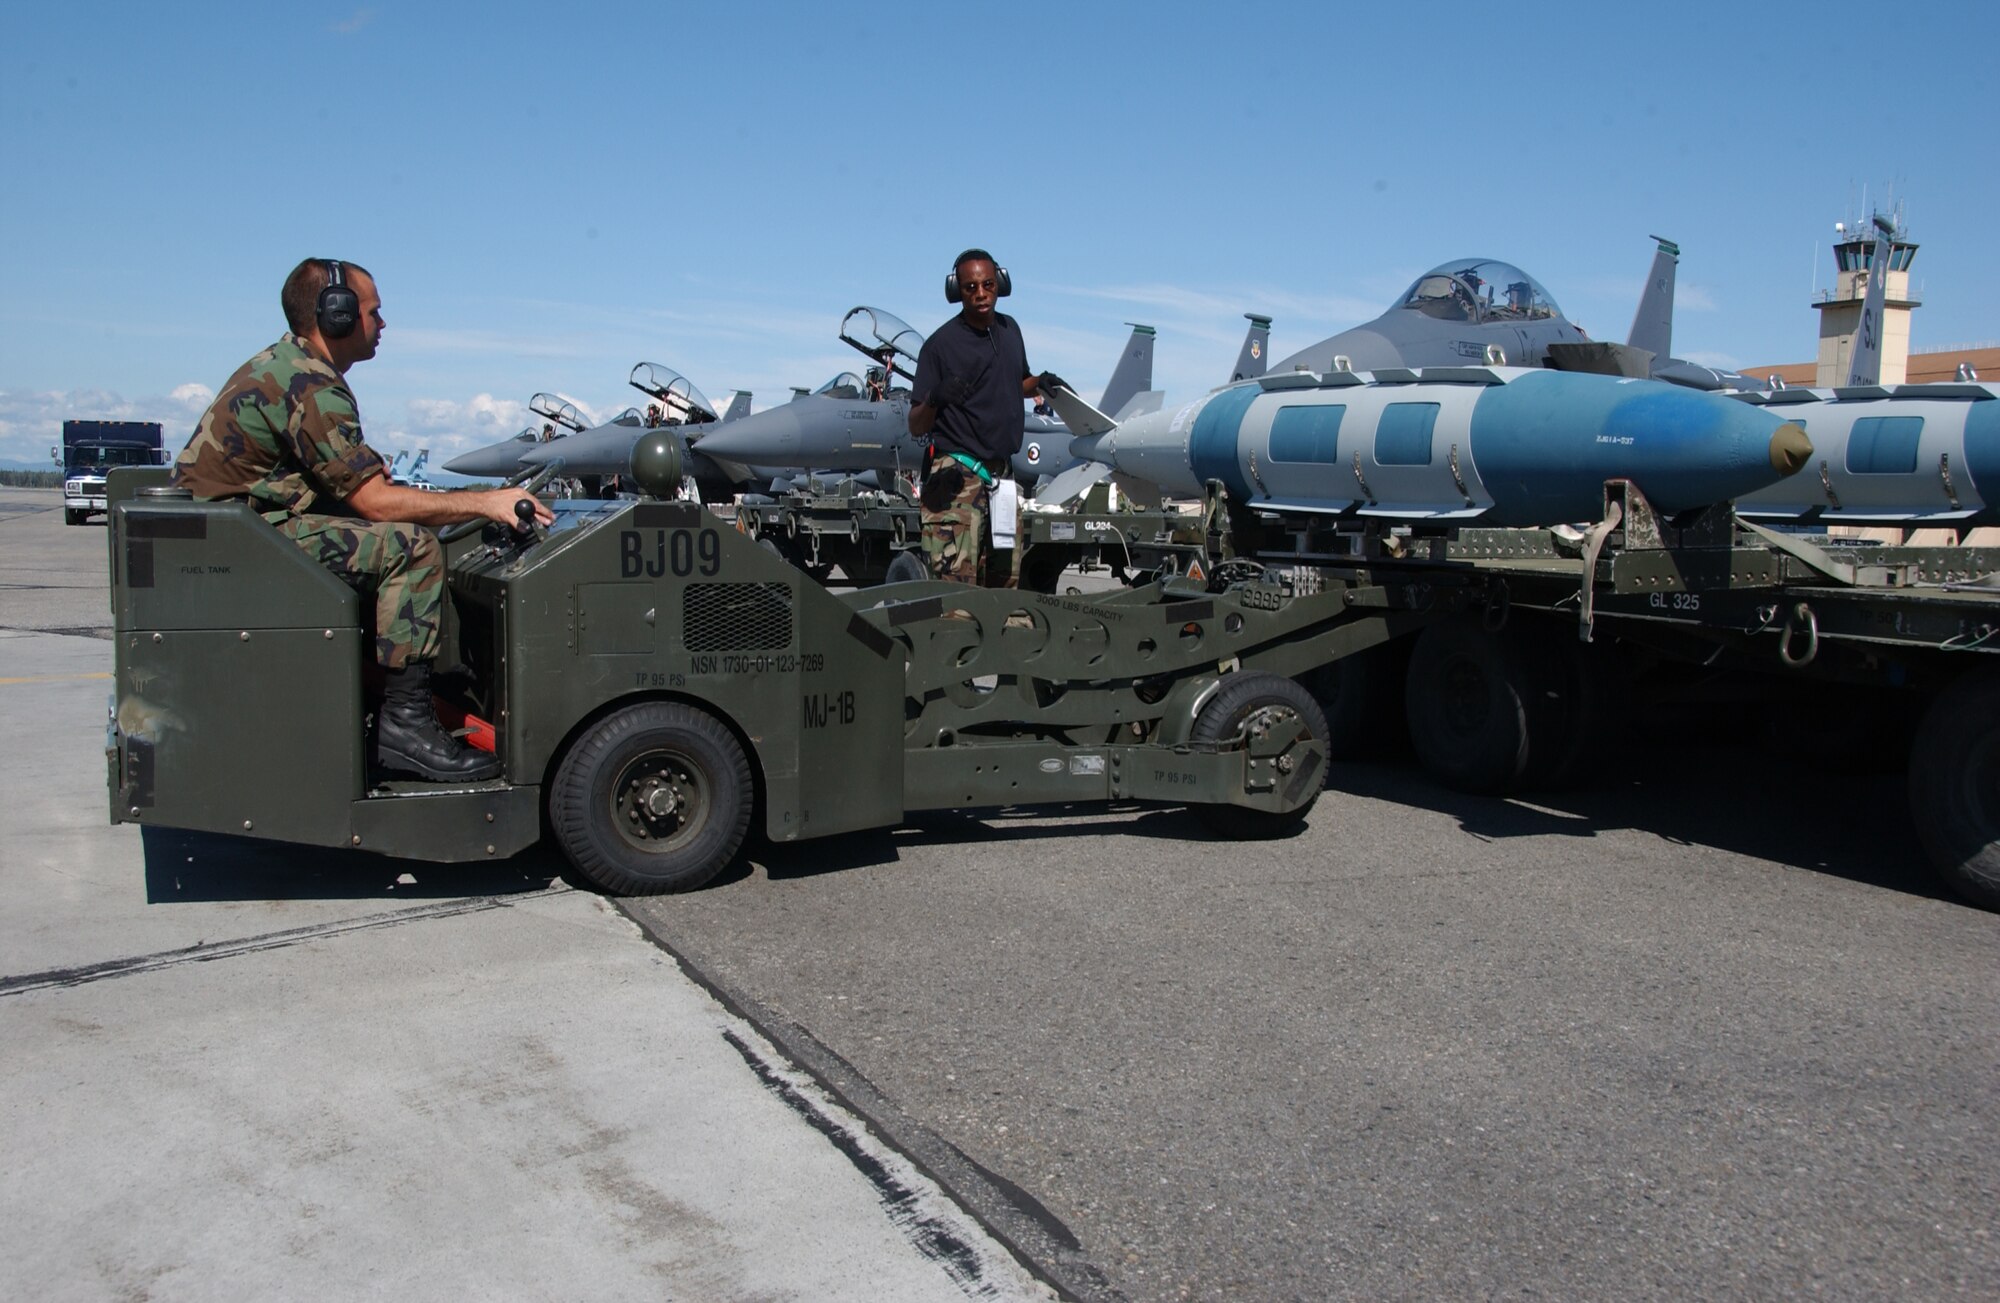 EIELSON AIR FORCE BASE, Alaska -- Staff Sgt. Ray Saunders (Right), Airman 1st Class Scott Perish (Left), weapons armament system specialists, 4th Aircraft Maintenance Squadron, Seymour Johnson Air Force Base, N.C., prepares to transport a GBU-31 bomb onto an F-15 Strike Eagle, 335th Fighter Squadron, Seymour Johnson Air Force Base, in front of the Thunderdome on July 24 during Red Flag-Alaska 07-3. This exercise provides a real-world training environment for maintenance and support personnel through the duration of RF-A. (U.S. Air Force Photo by Airman 1st Class Jonathan Snyder)